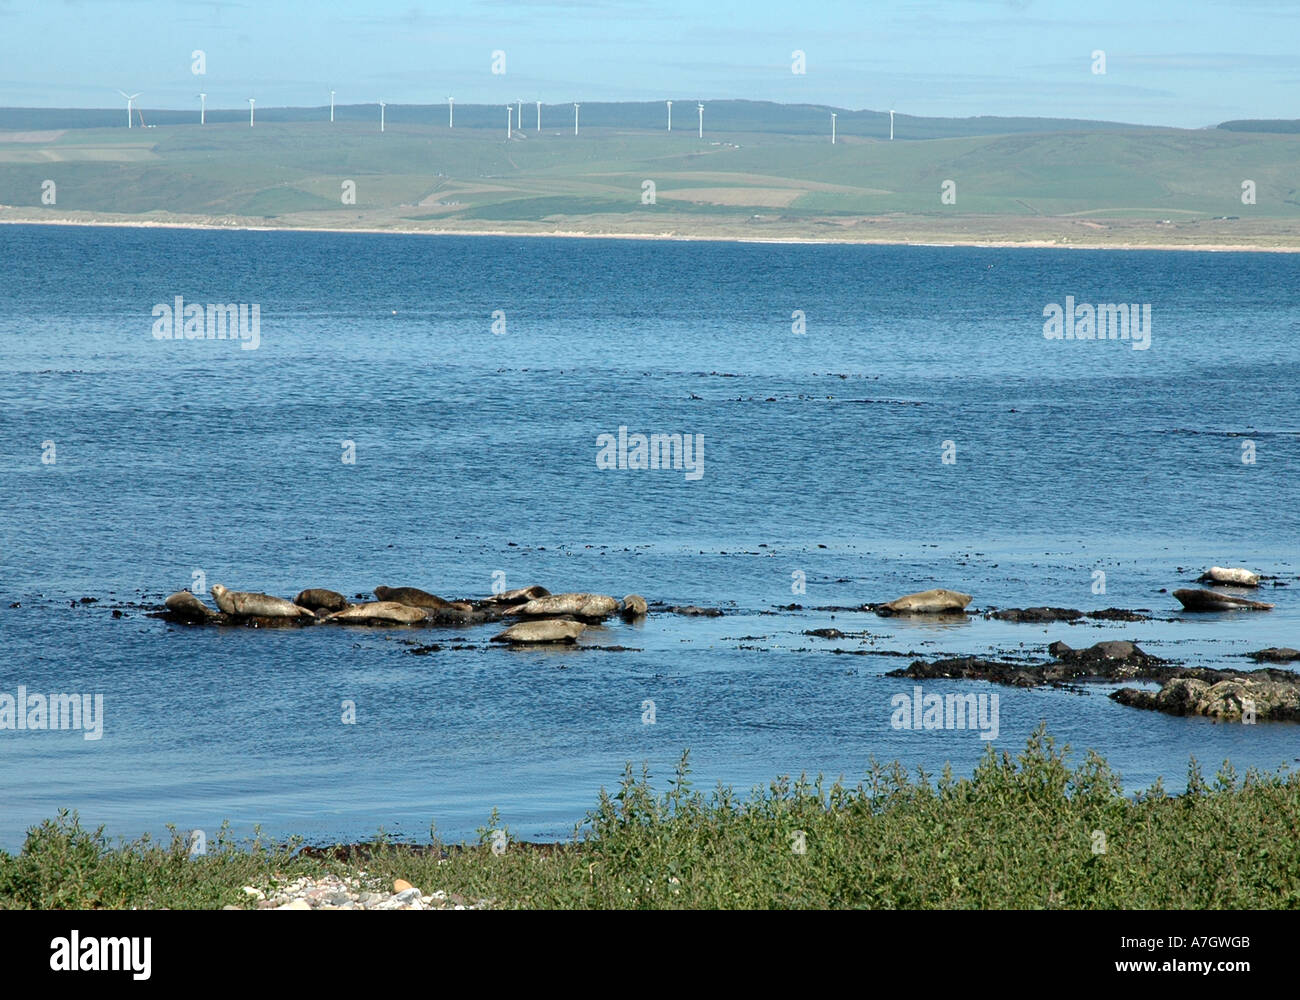 Seals basking close to shore. Windfarm in the background. Scotland. Stock Photo